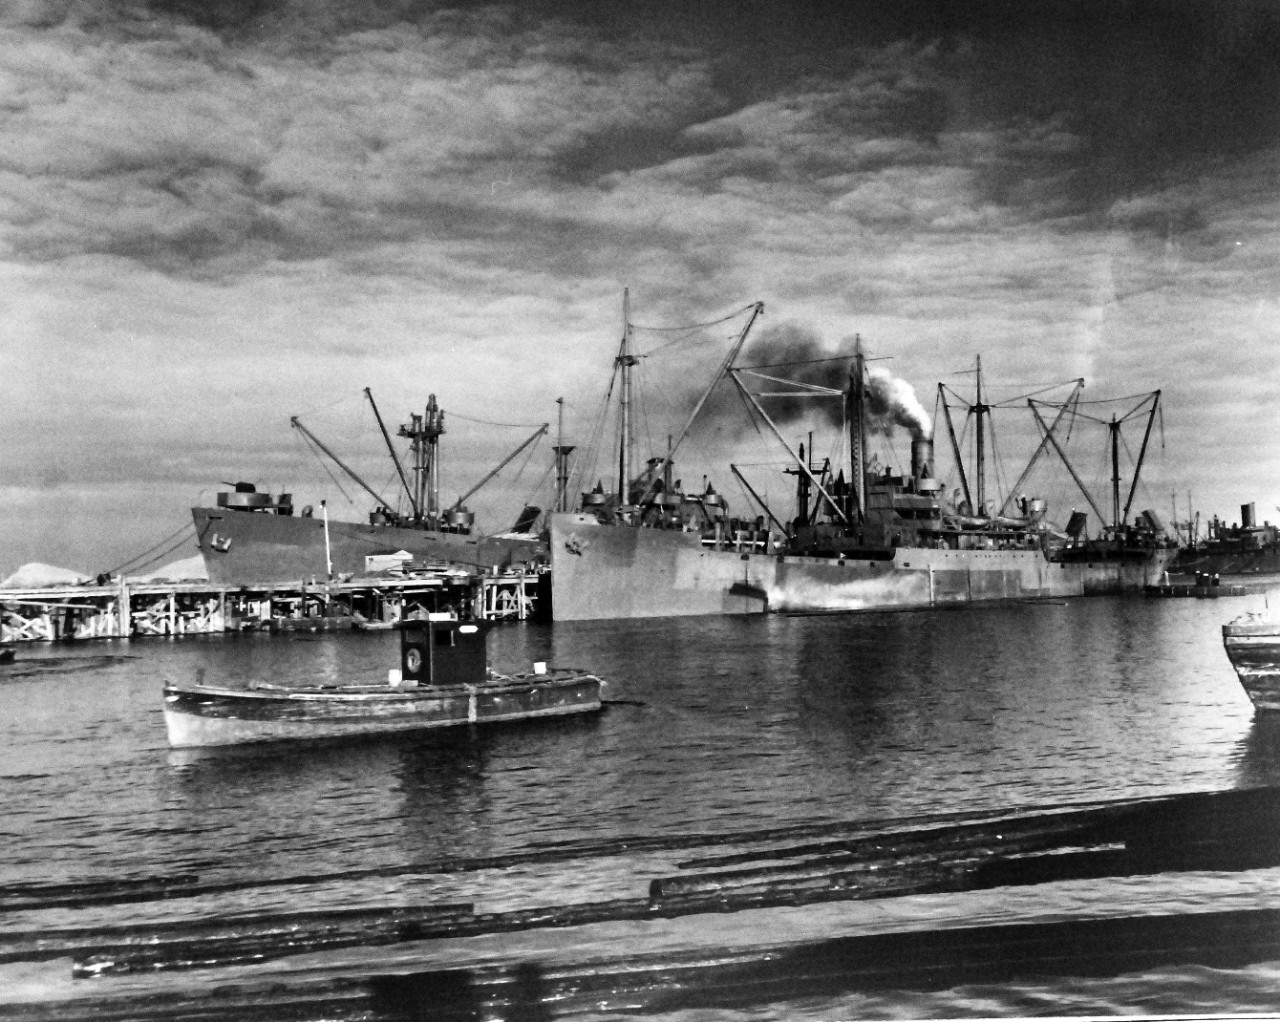 80-G-210043:    Sweepers Cove, Adak, Alaska, November 1943.    Ships at Navy Dock, Sweepers Cove, Adak, Alaska, 30 November 1943.  Official U.S. Navy Photograph, now in the collections of the National Archives.  (2013/ 9/19).  